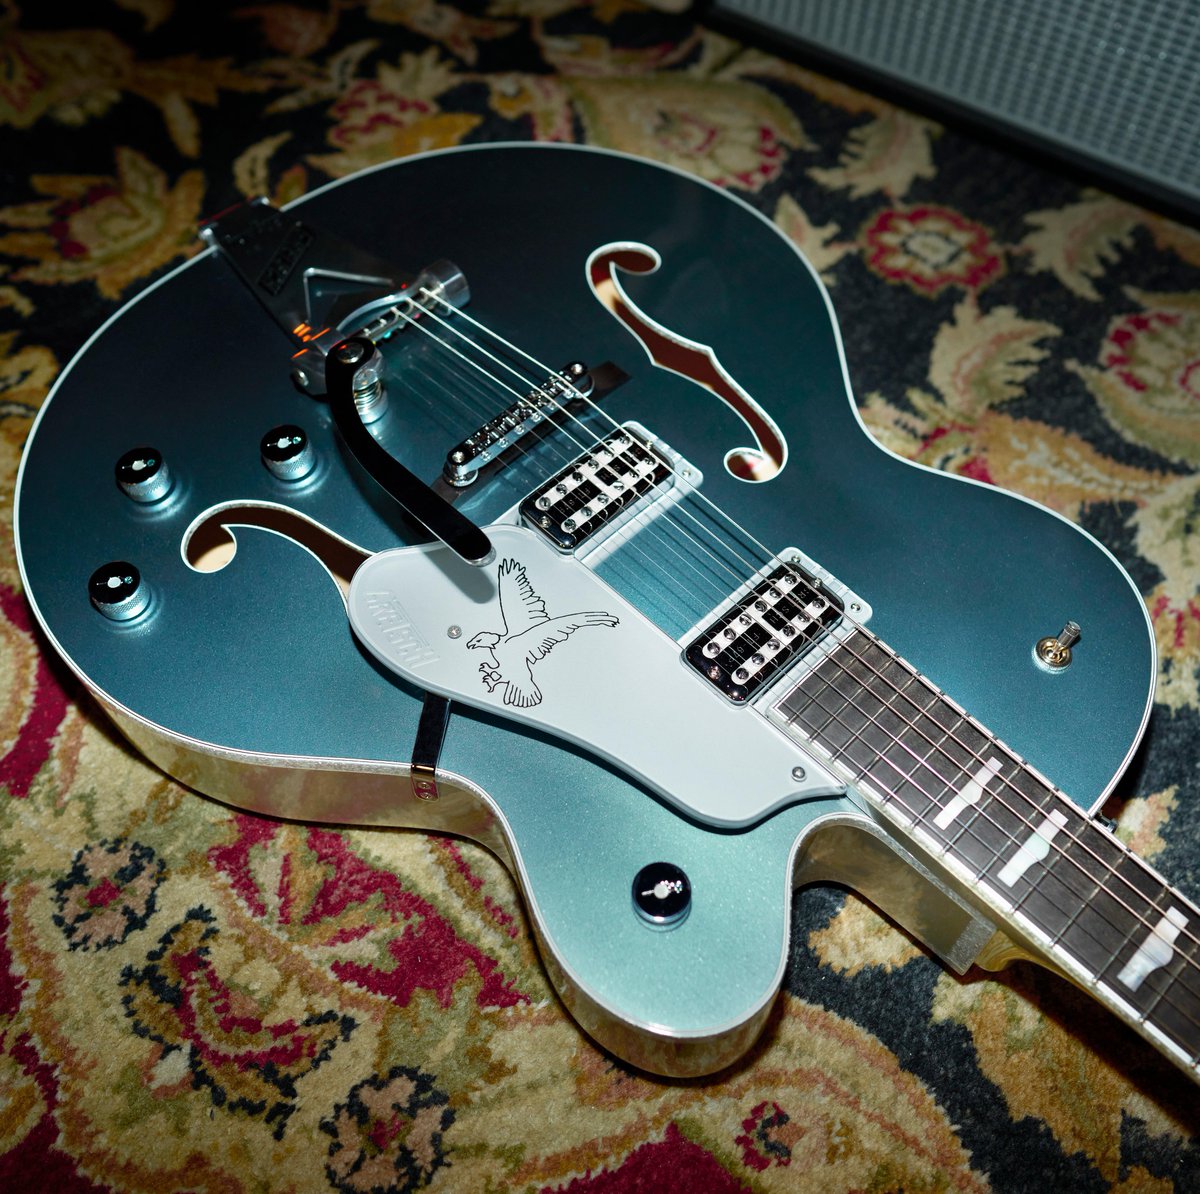 Powered by the all-new FT-67 Filter'Tron pickups, the Limited Edition 140th Anniversary Double Platinum Falcon delivers an unmistakable Gretsch sound while providing a voice to the next generation of players. Get yours here: bit.ly/43YOVUl